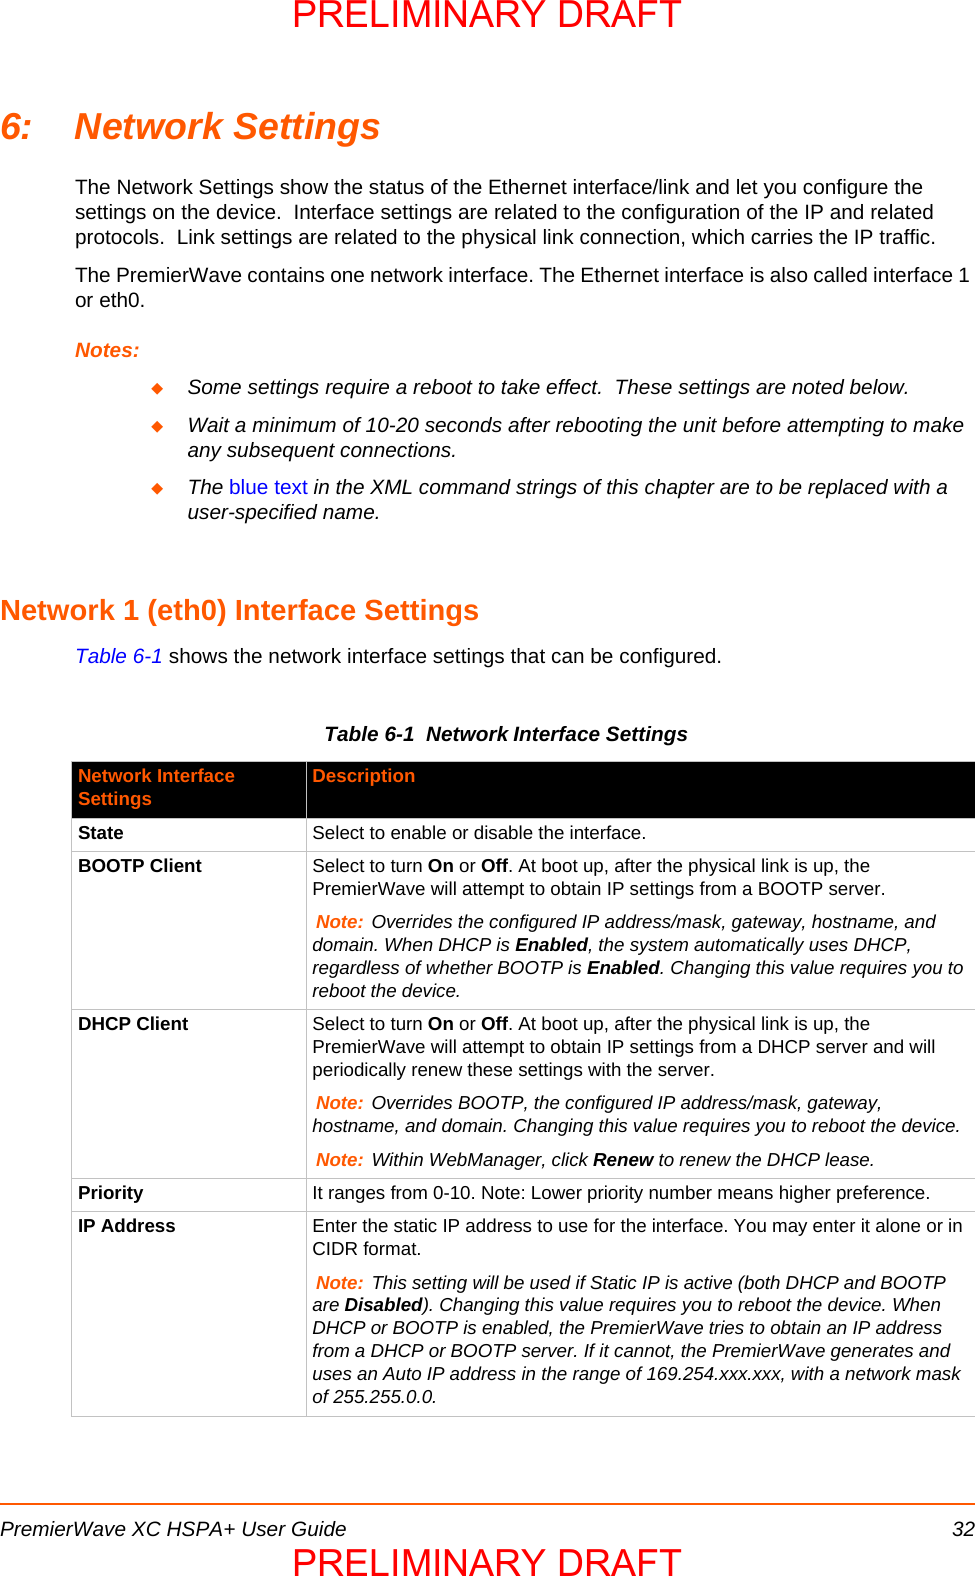 PremierWave XC HSPA+ User Guide 326: Network SettingsThe Network Settings show the status of the Ethernet interface/link and let you configure the settings on the device.  Interface settings are related to the configuration of the IP and related protocols.  Link settings are related to the physical link connection, which carries the IP traffic.The PremierWave contains one network interface. The Ethernet interface is also called interface 1 or eth0.Notes:Some settings require a reboot to take effect.  These settings are noted below.Wait a minimum of 10-20 seconds after rebooting the unit before attempting to make any subsequent connections.The blue text in the XML command strings of this chapter are to be replaced with a user-specified name.Network 1 (eth0) Interface SettingsTable 6-1 shows the network interface settings that can be configured.Table 6-1  Network Interface SettingsNetwork Interface Settings DescriptionState Select to enable or disable the interface.BOOTP Client Select to turn On or Off. At boot up, after the physical link is up, the PremierWave will attempt to obtain IP settings from a BOOTP server.Note: Overrides the configured IP address/mask, gateway, hostname, and domain. When DHCP is Enabled, the system automatically uses DHCP, regardless of whether BOOTP is Enabled. Changing this value requires you to reboot the device.DHCP Client Select to turn On or Off. At boot up, after the physical link is up, the PremierWave will attempt to obtain IP settings from a DHCP server and will periodically renew these settings with the server.Note: Overrides BOOTP, the configured IP address/mask, gateway, hostname, and domain. Changing this value requires you to reboot the device.Note: Within WebManager, click Renew to renew the DHCP lease.Priority It ranges from 0-10. Note: Lower priority number means higher preference.IP Address Enter the static IP address to use for the interface. You may enter it alone or in CIDR format.Note: This setting will be used if Static IP is active (both DHCP and BOOTP are Disabled). Changing this value requires you to reboot the device. When DHCP or BOOTP is enabled, the PremierWave tries to obtain an IP address from a DHCP or BOOTP server. If it cannot, the PremierWave generates and uses an Auto IP address in the range of 169.254.xxx.xxx, with a network mask of 255.255.0.0.PRELIMINARY DRAFTPRELIMINARY DRAFT